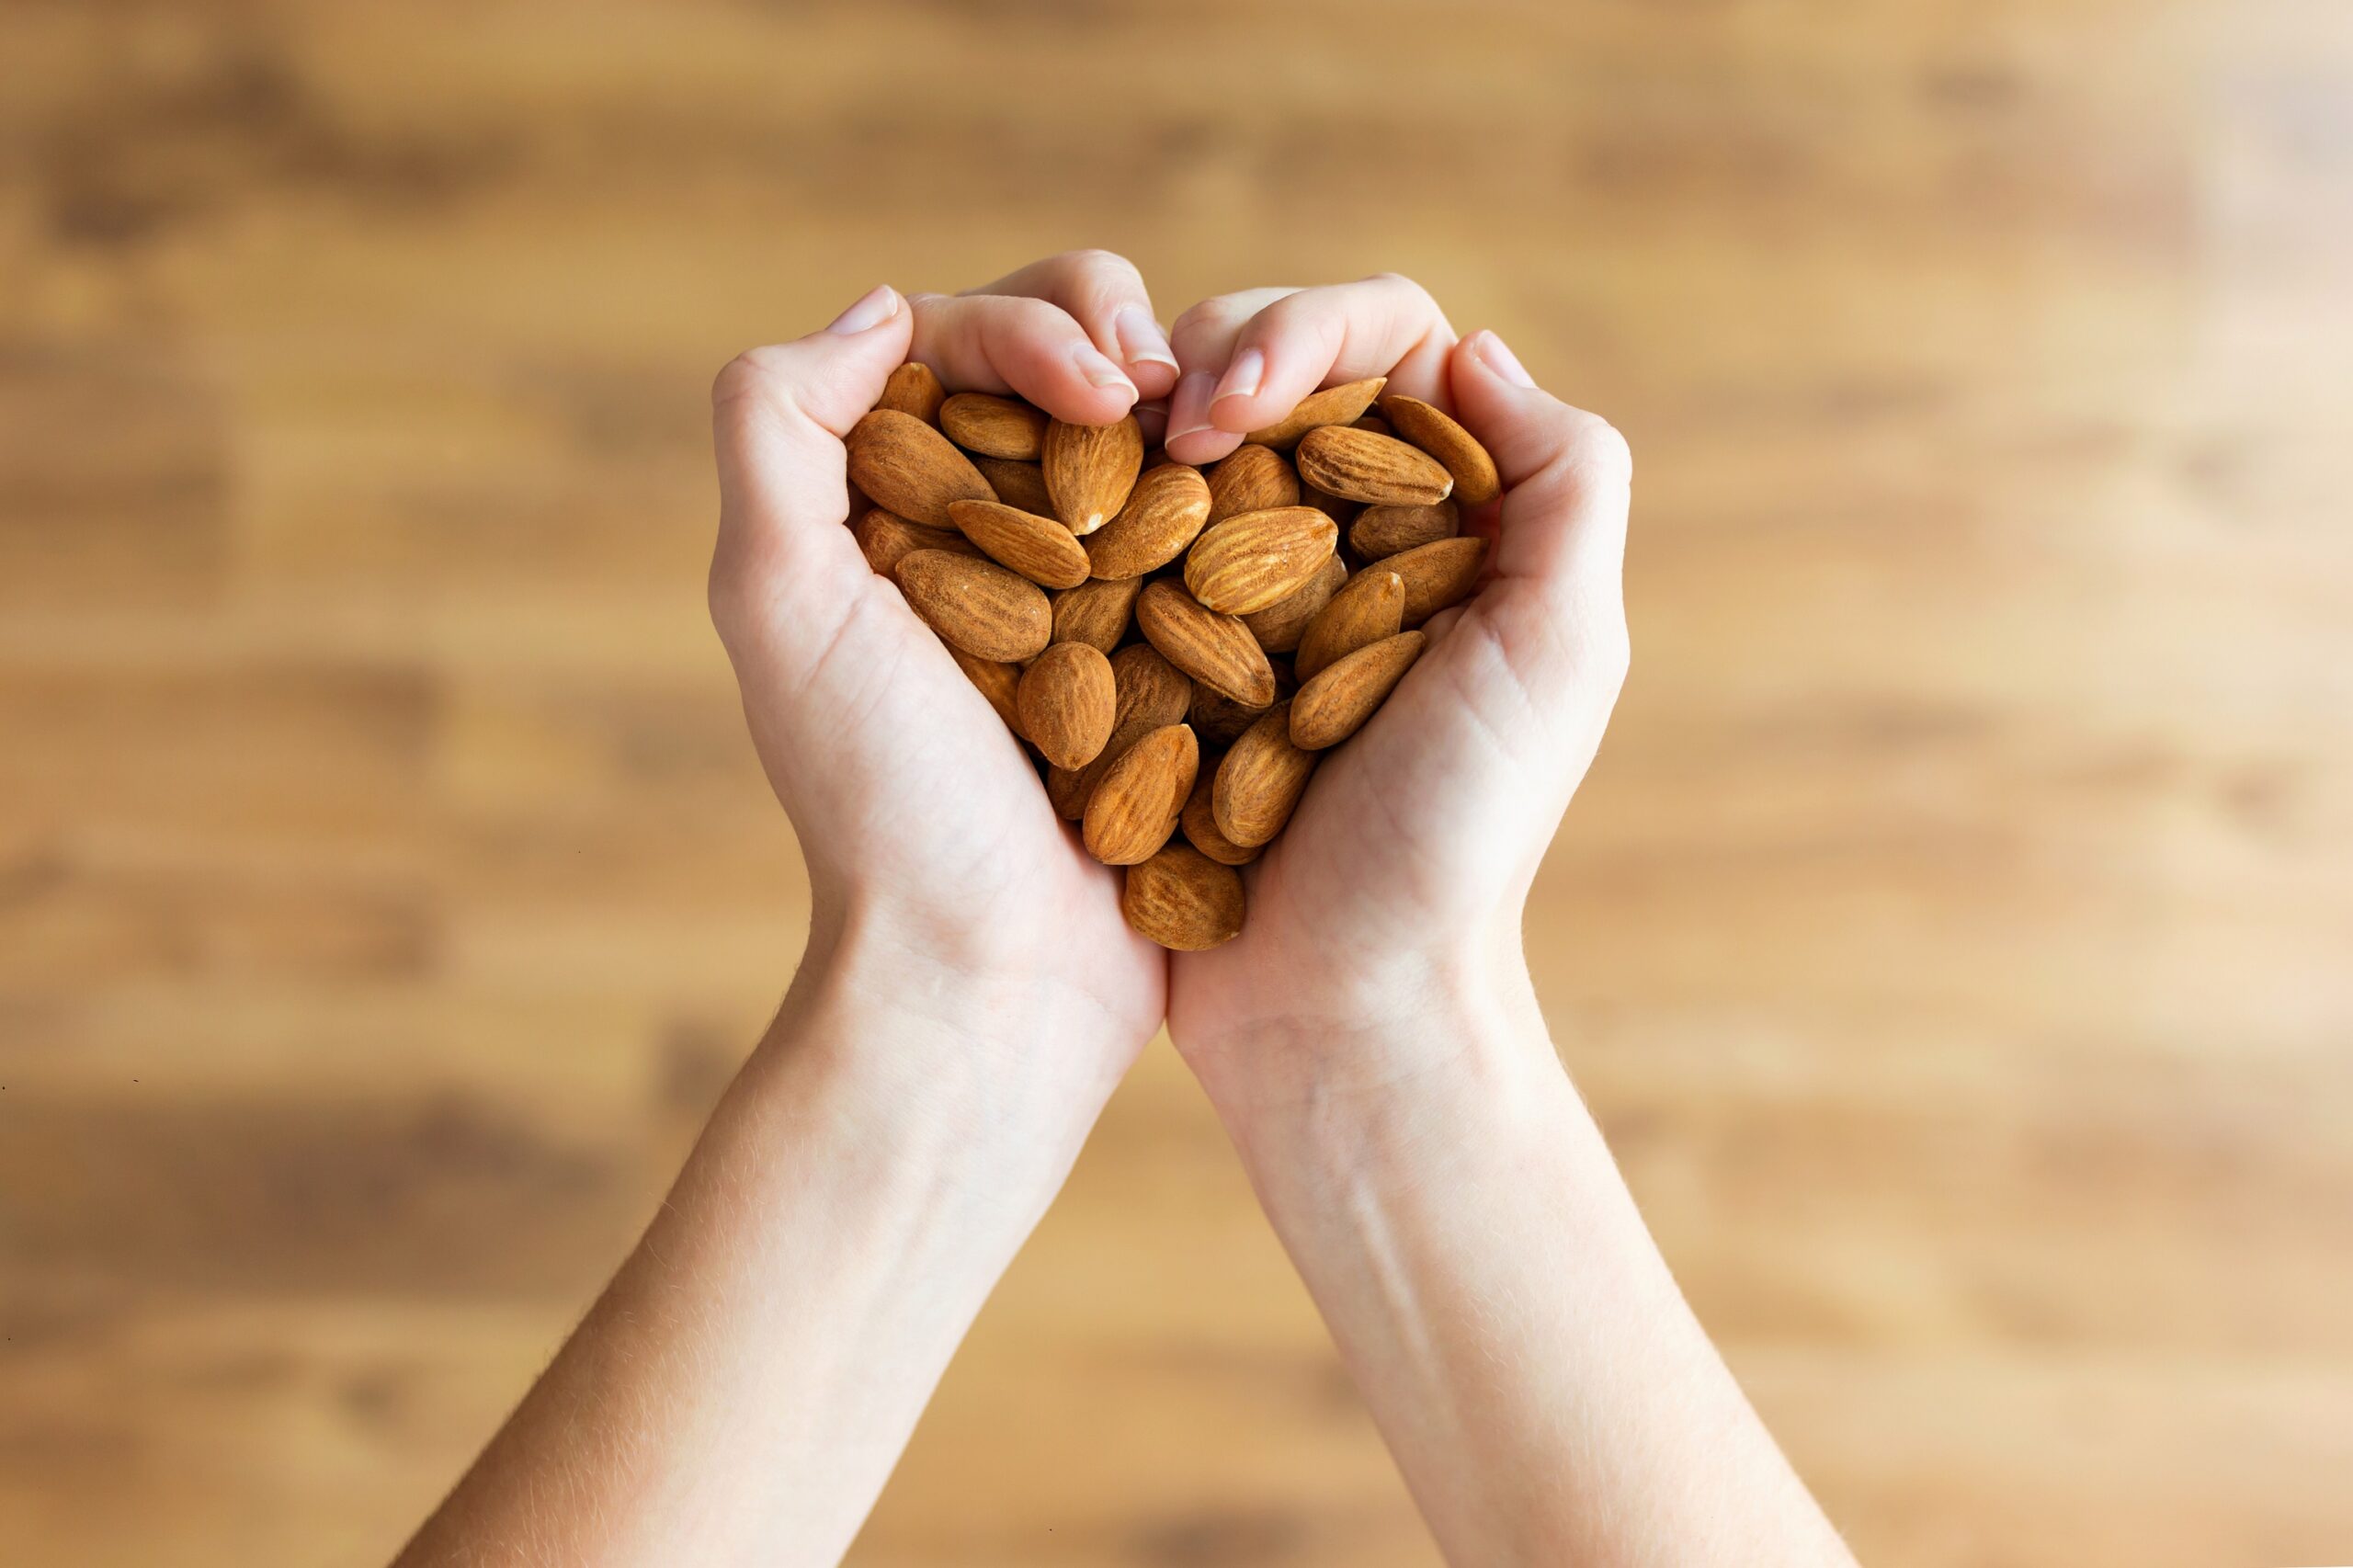 Almonds help lose weight and improve cardiometabolic health